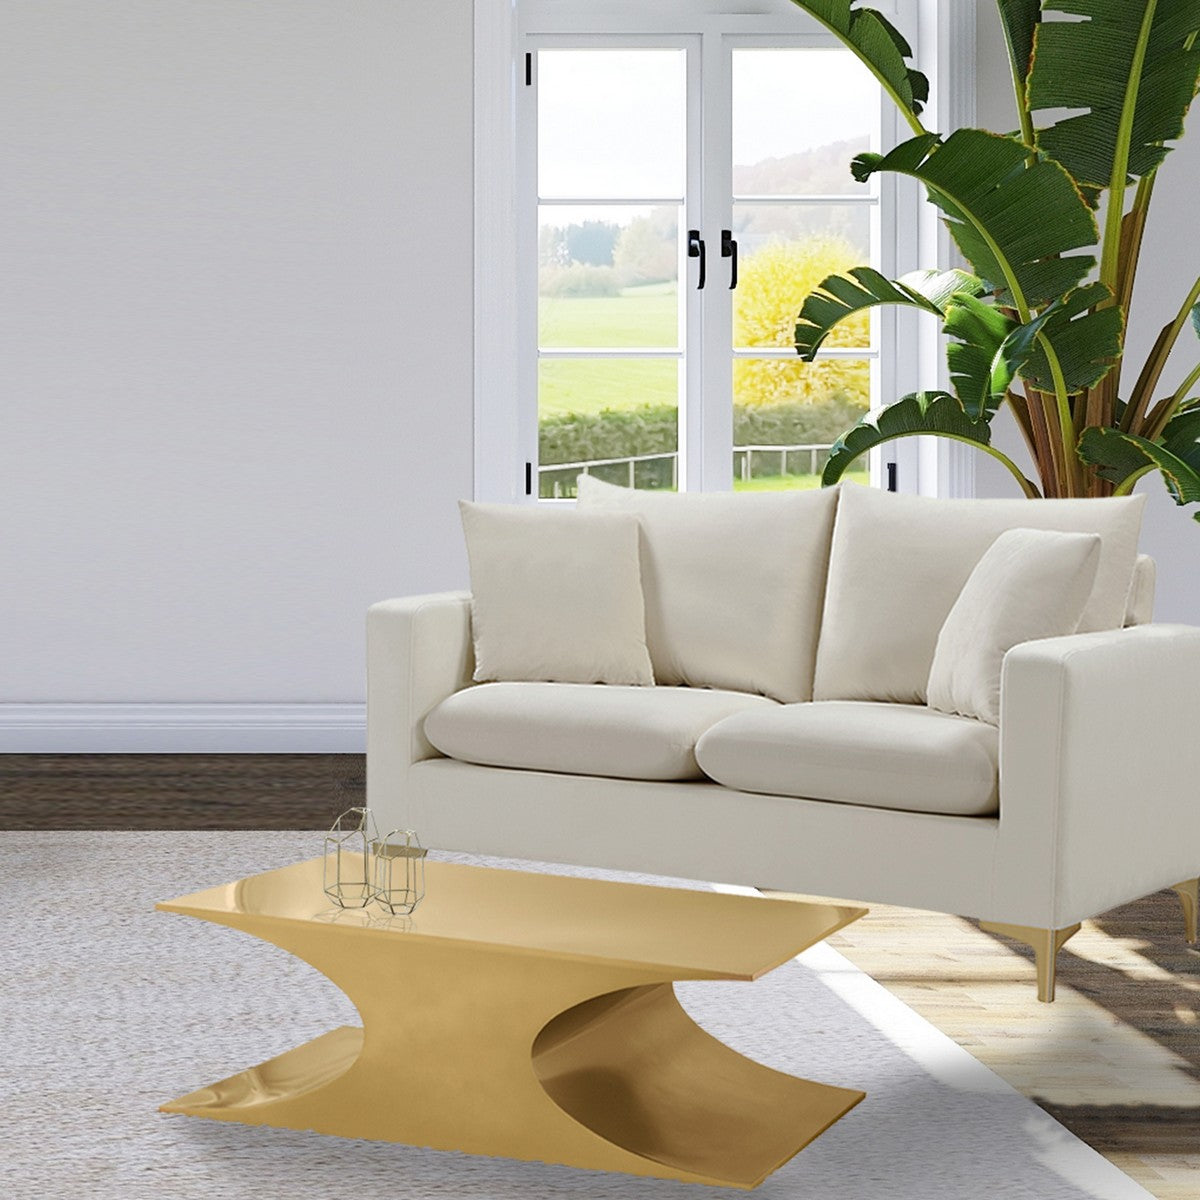 Meridian Furniture Russo Coffee table